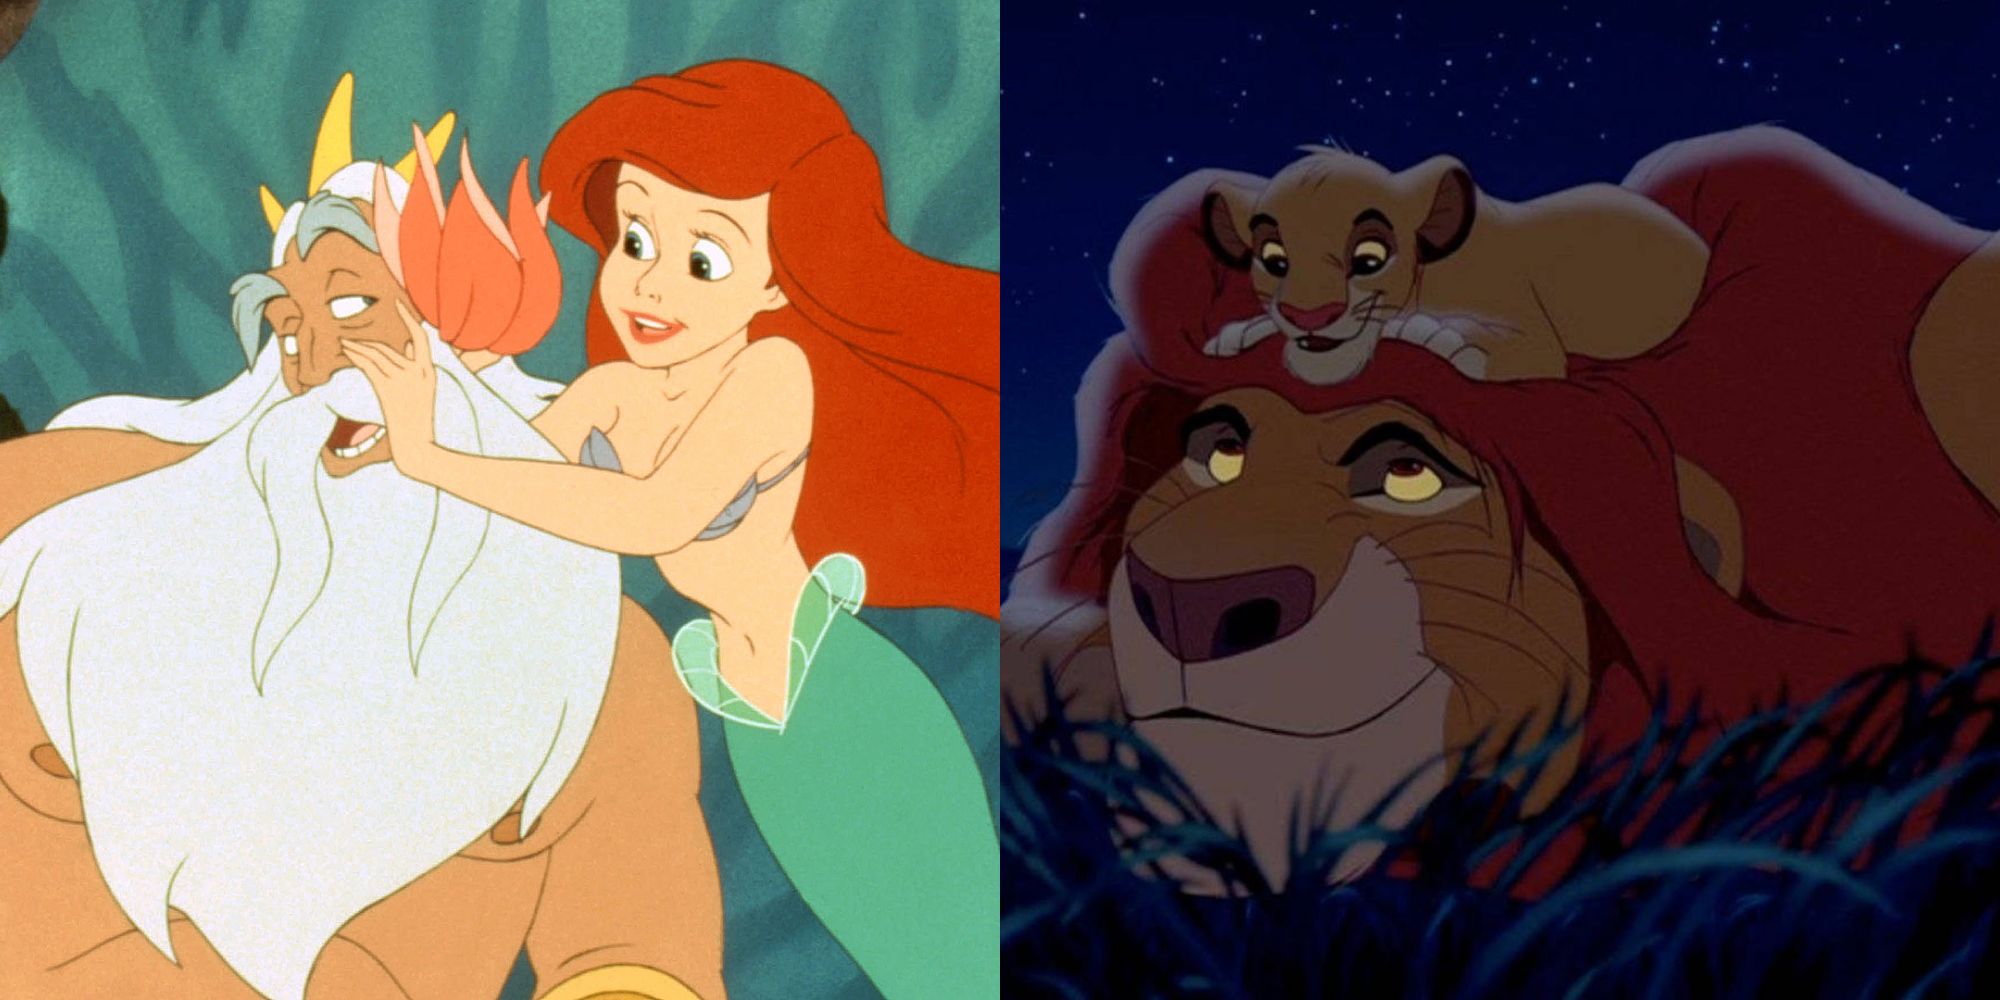 Split image showing Triton and Ariel in The Little Mermaid and Simba and Mufasa in The Lion King.